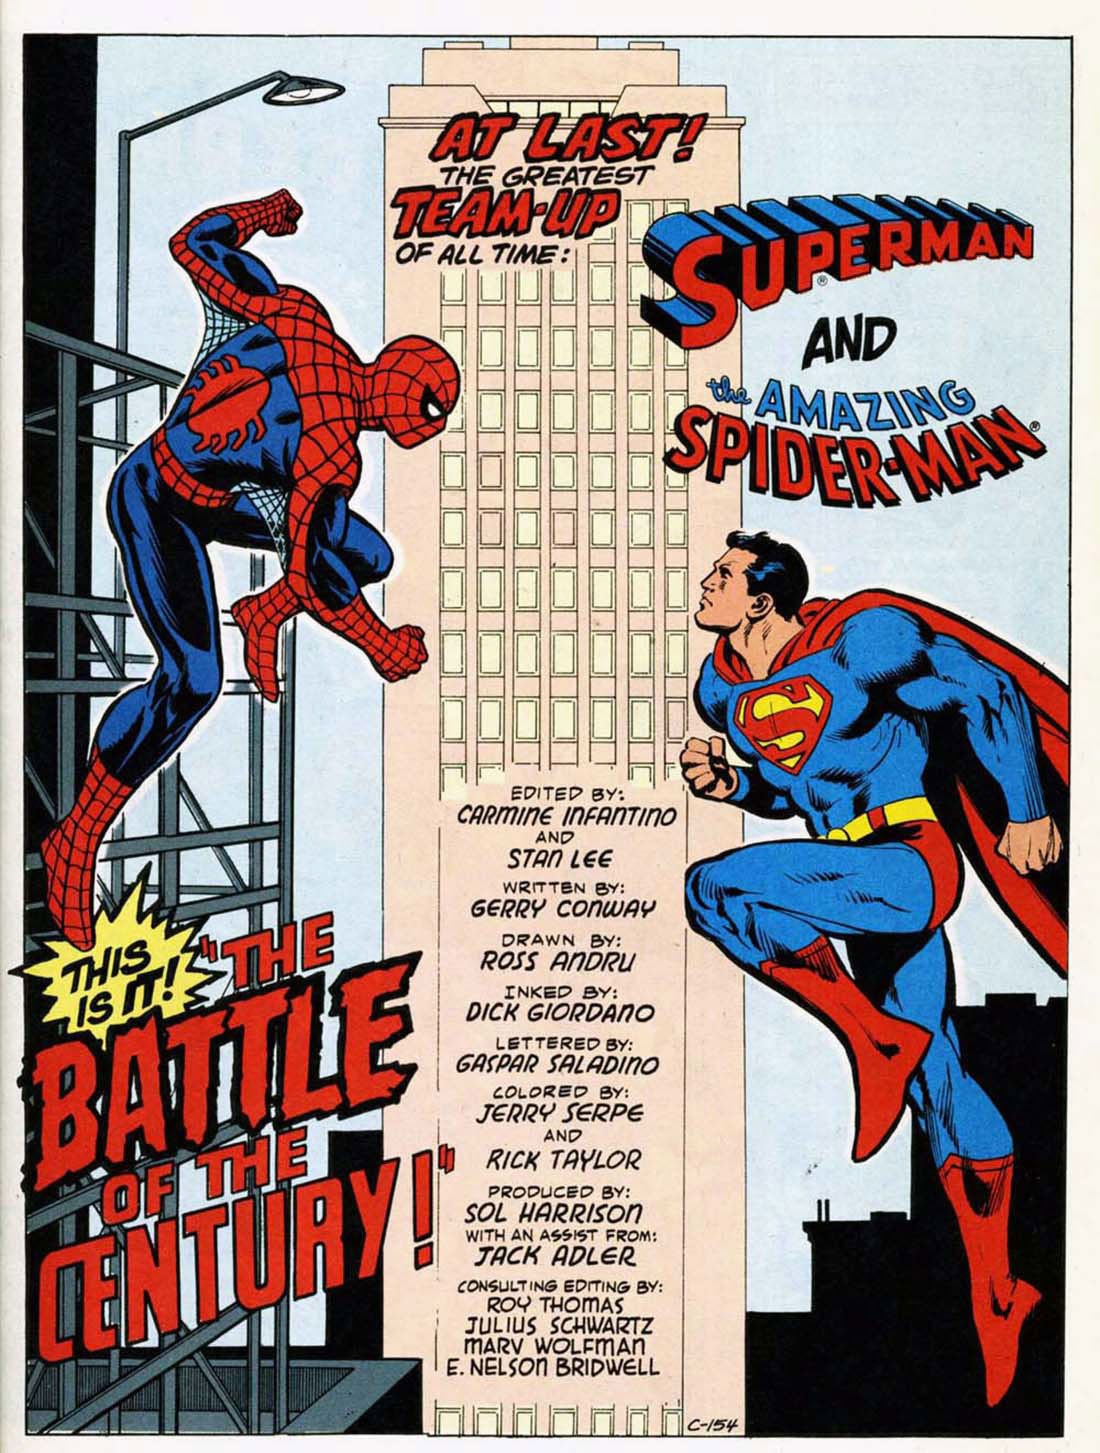 first page of the 1976 Marvel/DC comic book crossover publication "Superman vs. the Amazing Spider-Man." In the foreground, with a skyscraper in the background, are Spider-Man on the left and Superman a bit lower on the right. Both are in action poses as if they are about to clash. In between them are the credits for the special issue (writers, artists, etc.). At the top of the page, text hypes: "At Last! The Greatest Team-Up of All Time: Superman and the Amazing Spider-Man" (both character names are written in their respective fonts) In the lower left, just below Spider-Man, text reads: "This Is It! The Battle of the Century!"